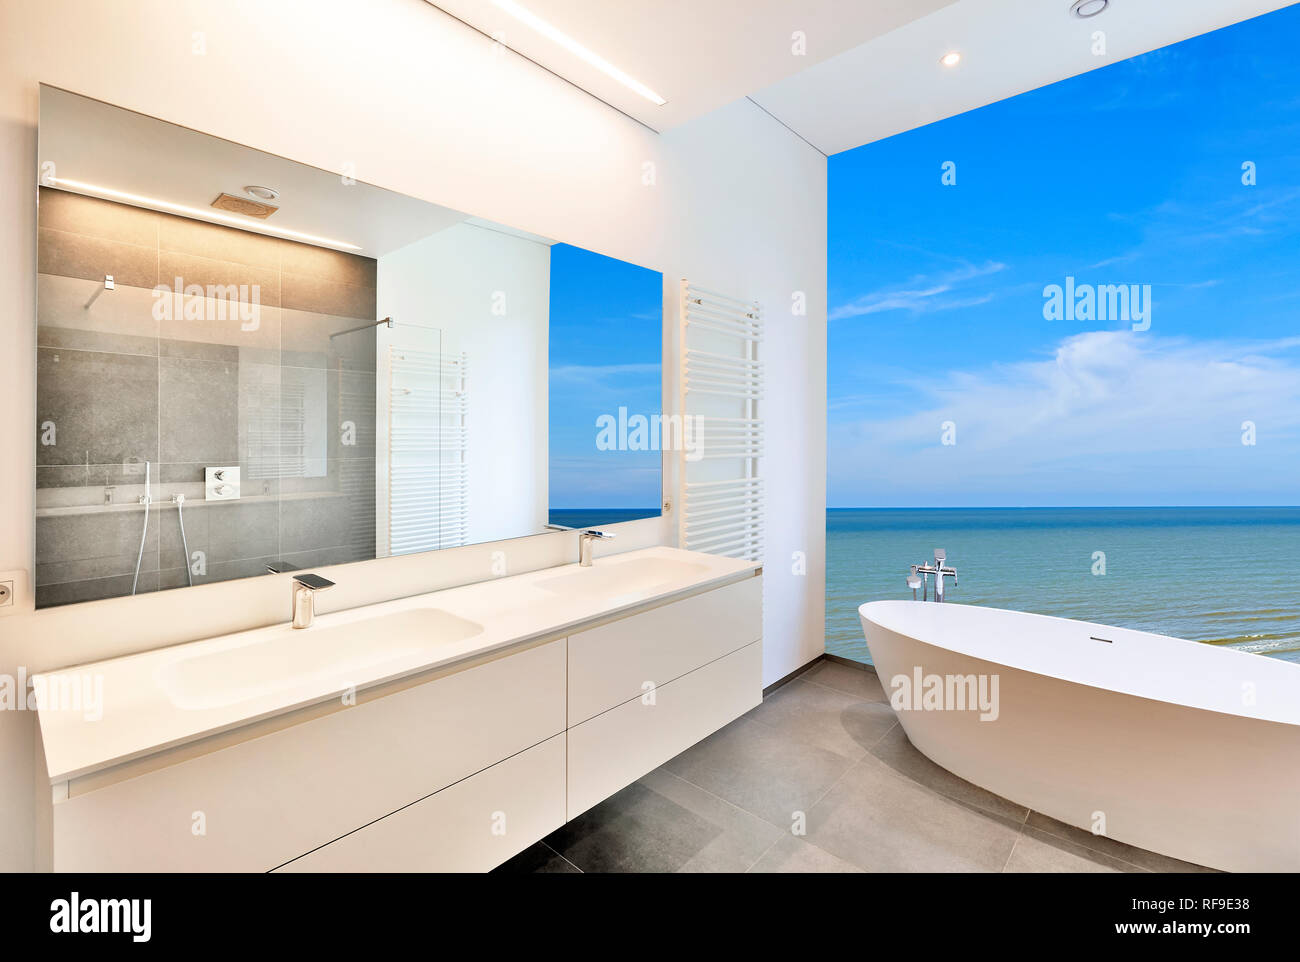 Bathtub In Corian Faucet And Shower In Tiled Bathroom With Ocean